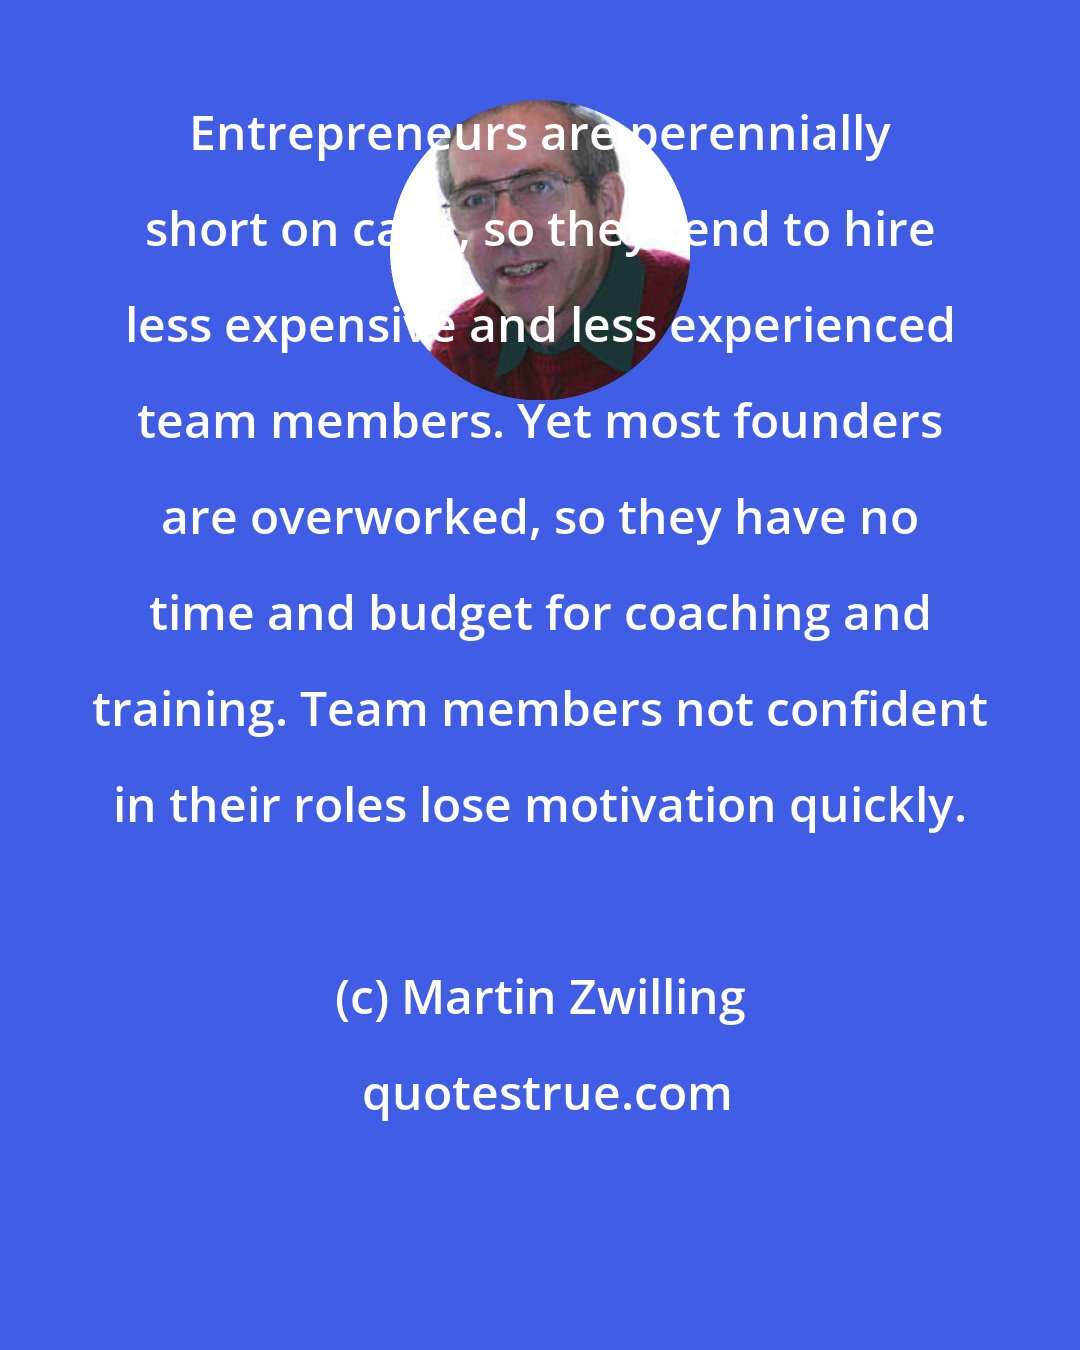 Martin Zwilling: Entrepreneurs are perennially short on cash, so they tend to hire less expensive and less experienced team members. Yet most founders are overworked, so they have no time and budget for coaching and training. Team members not confident in their roles lose motivation quickly.